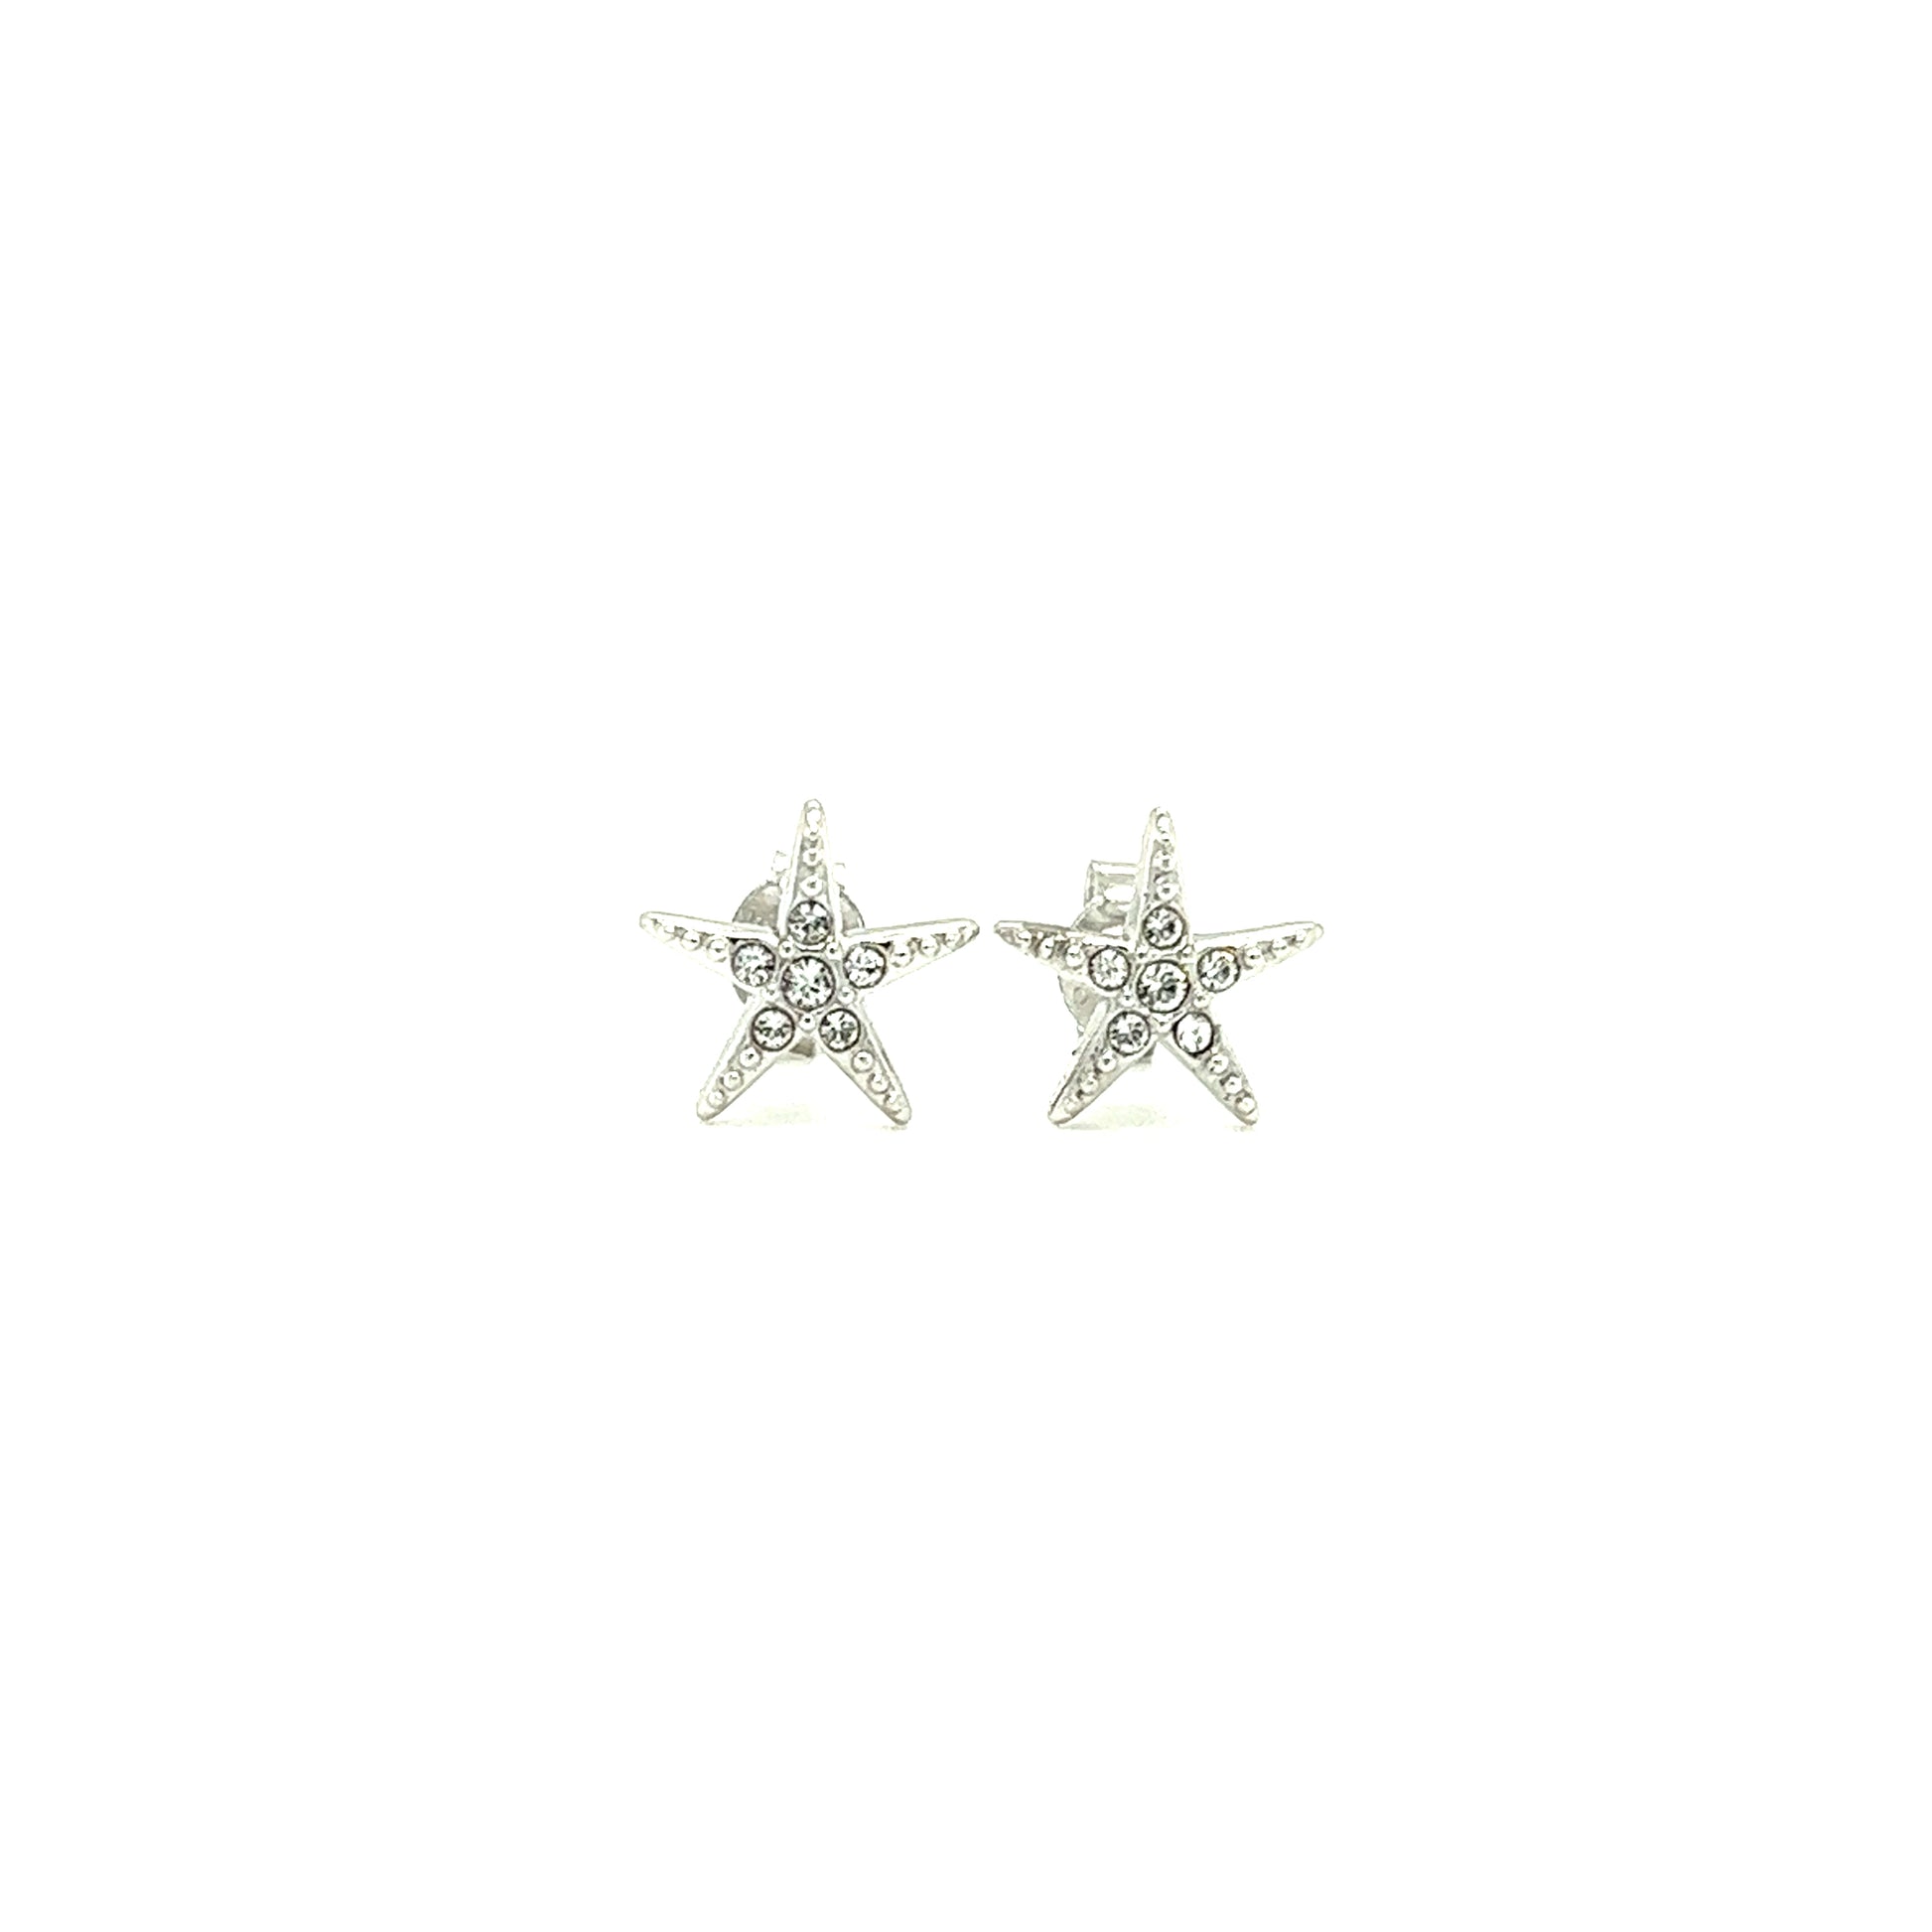 Starfish Stud Earrings with White Crystals in Sterling Silver Front View